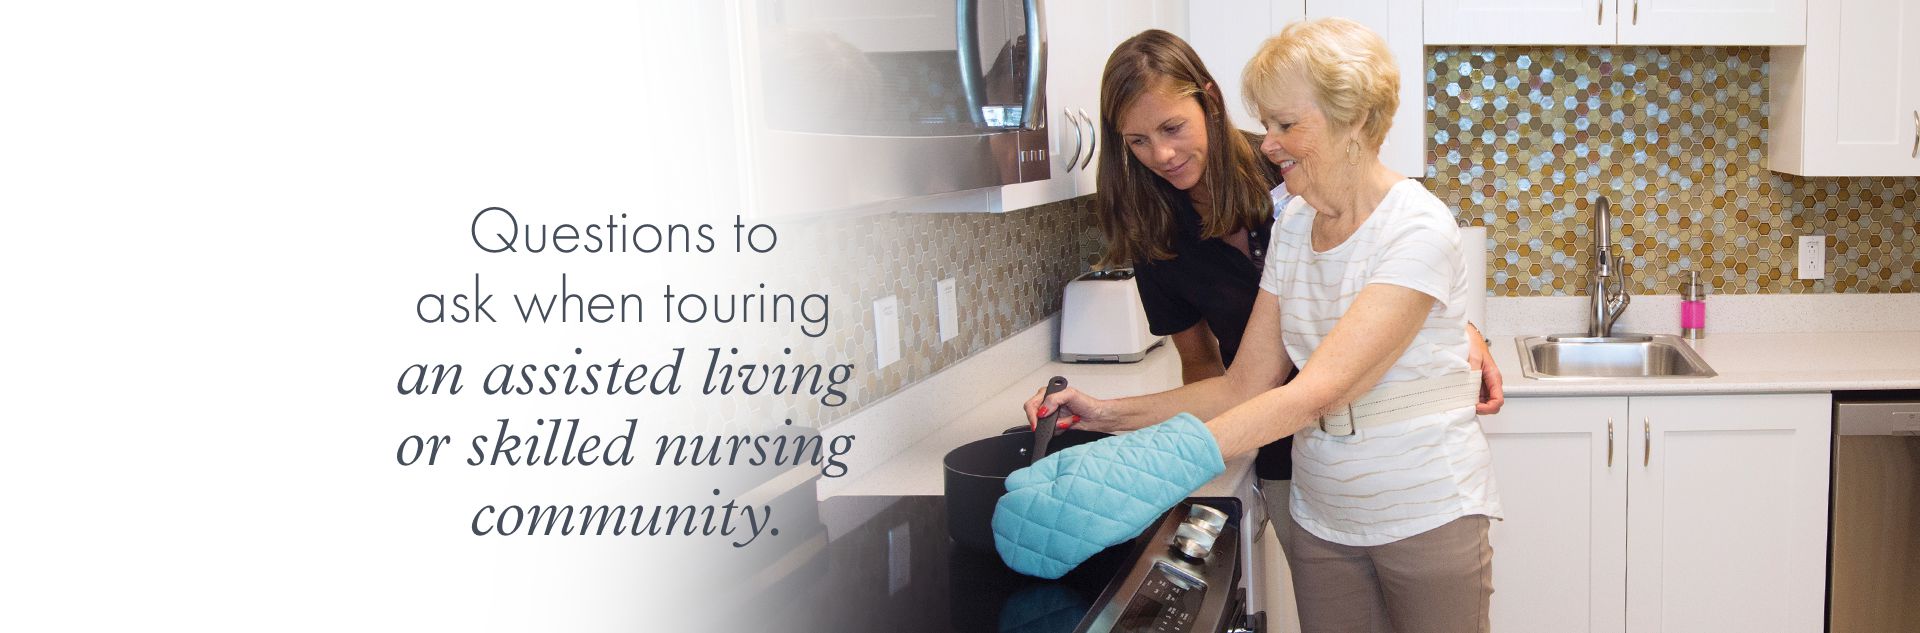 Questions to ask when touring an assisted living or skilled nursing community.